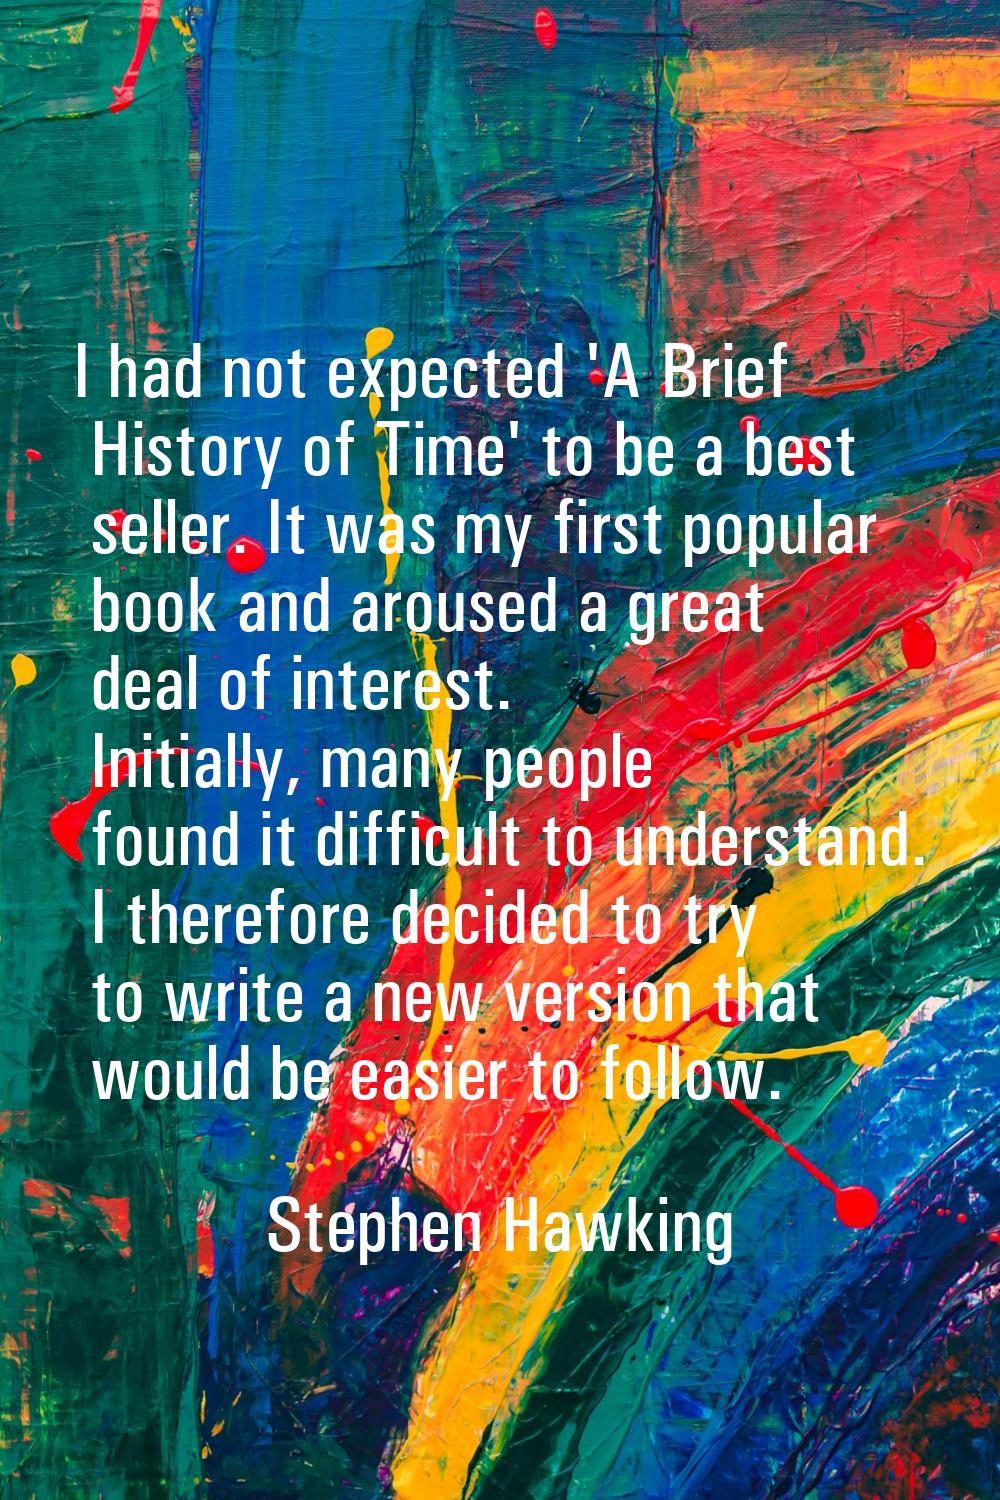 I had not expected 'A Brief History of Time' to be a best seller. It was my first popular book and 